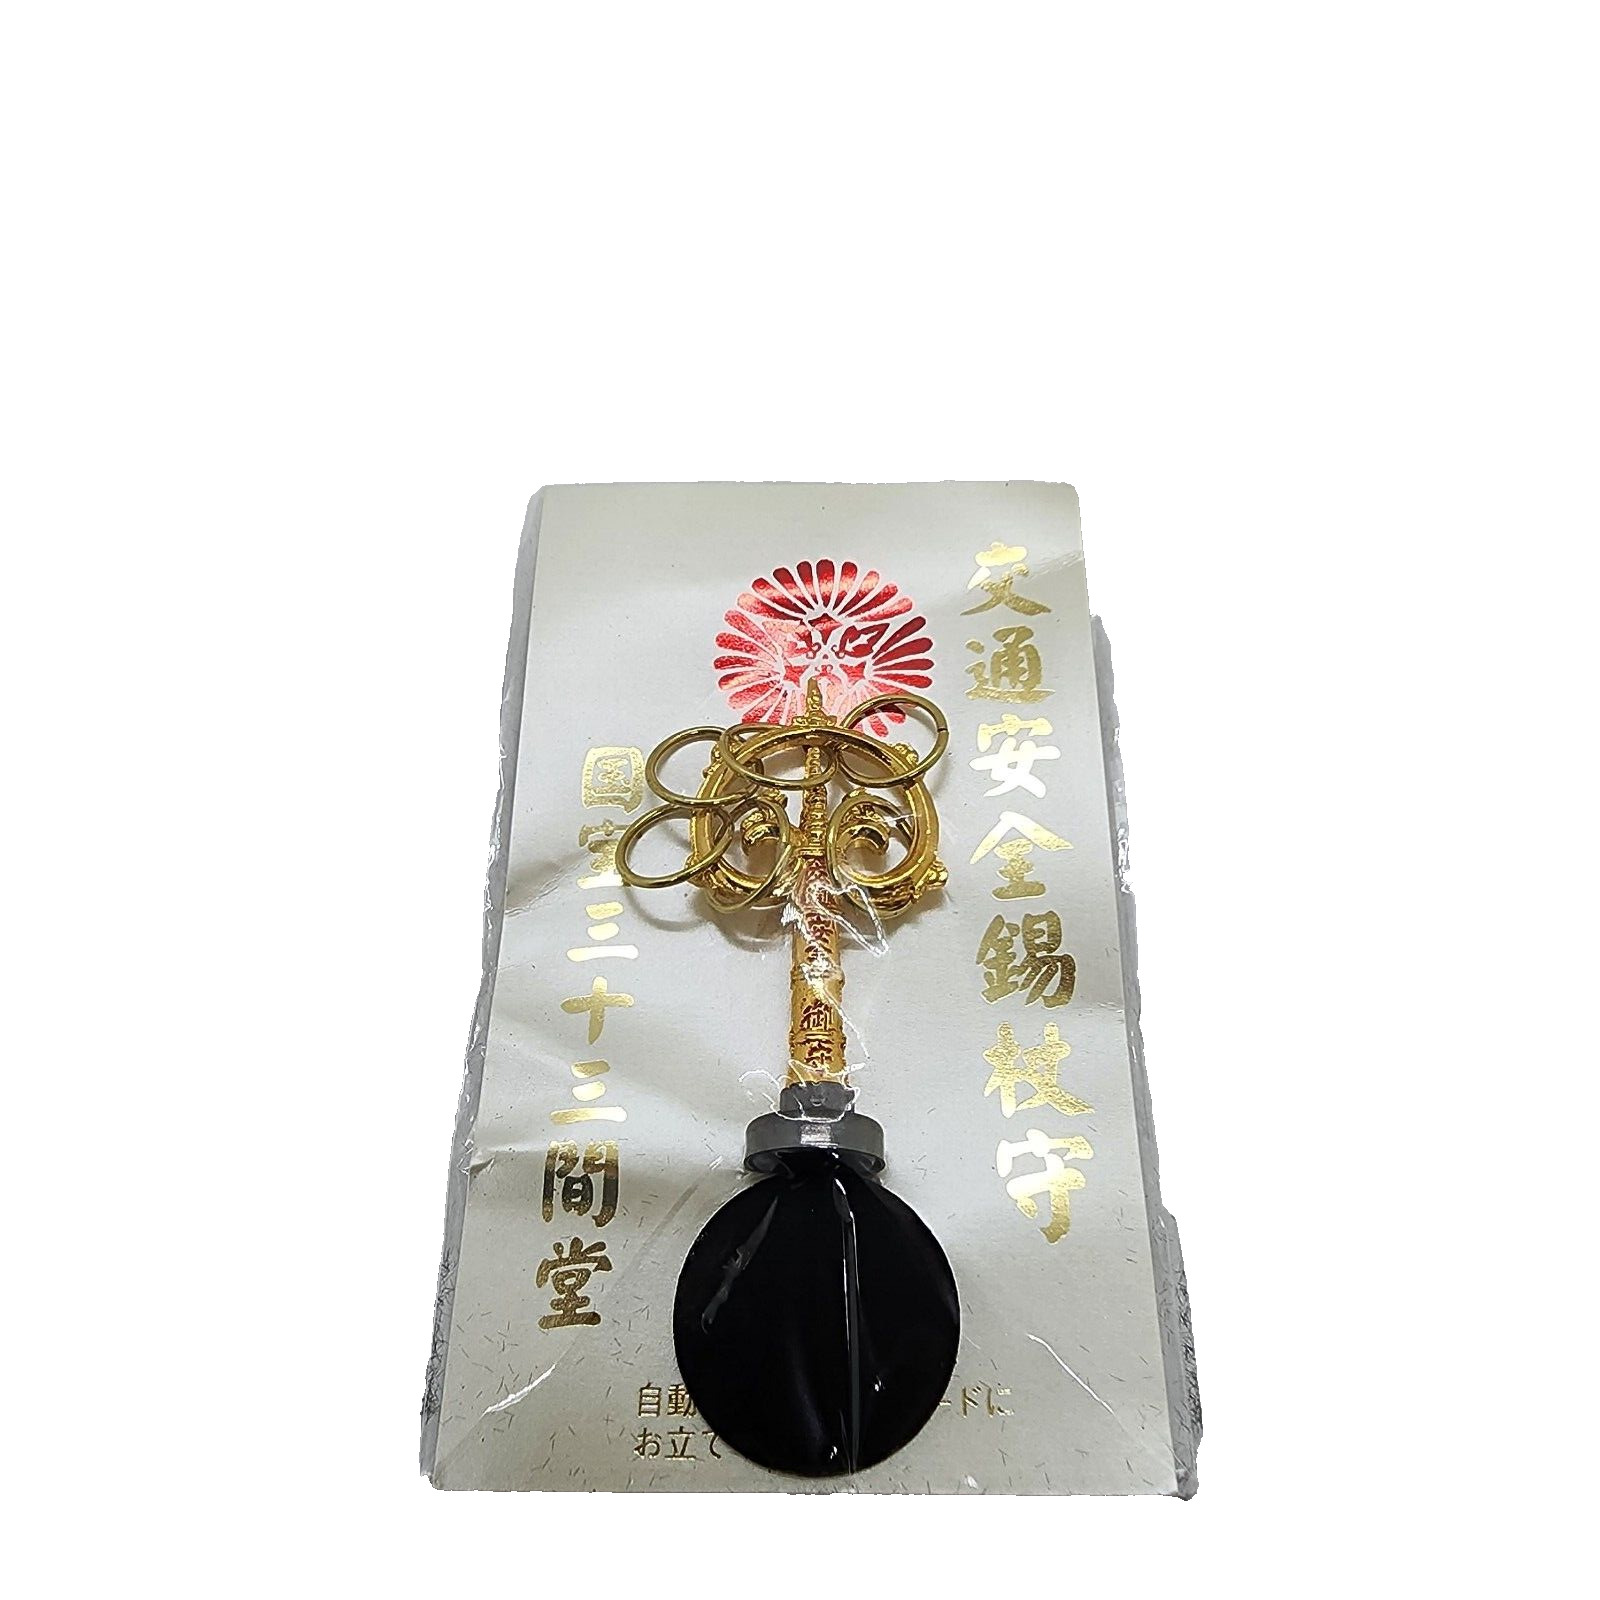 OMAMORI Japanese Good Luck Charm Golden Fountain and Rings for Traffic Safety